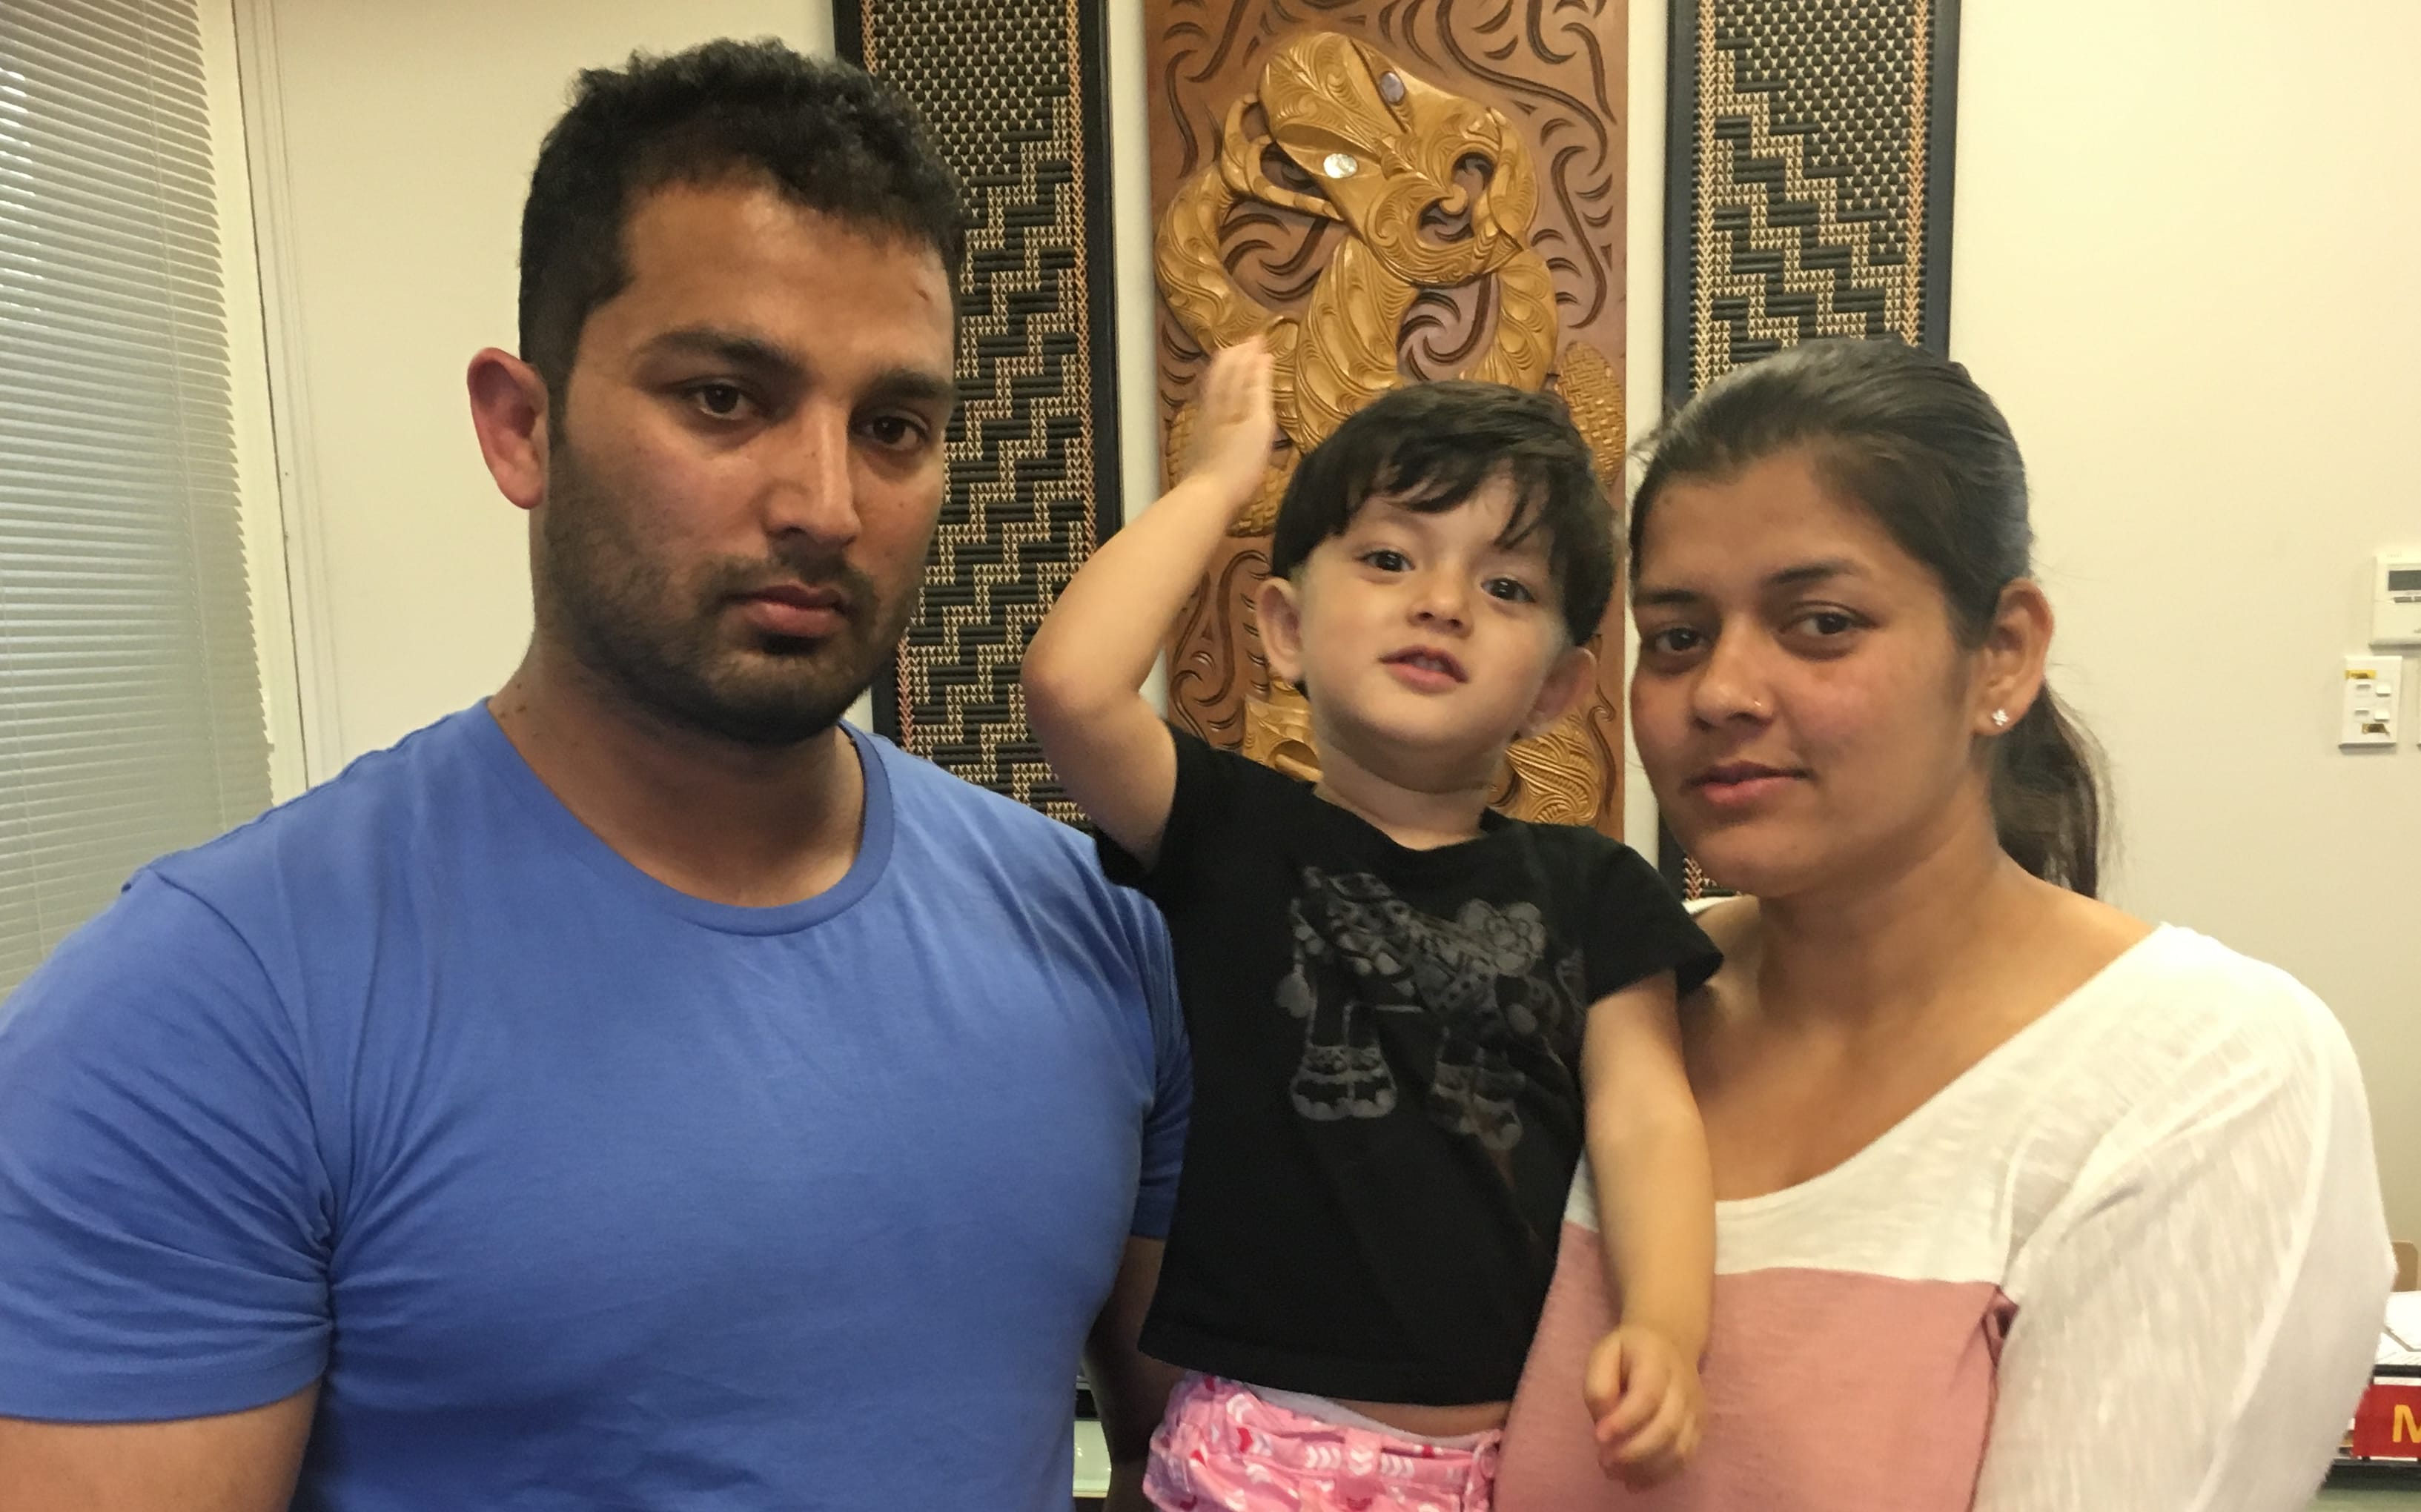 Vikram Salaria (left), Khwahish and Asha Rani will have to move back to India as a family if Ms Rani is forced out of New Zealand.